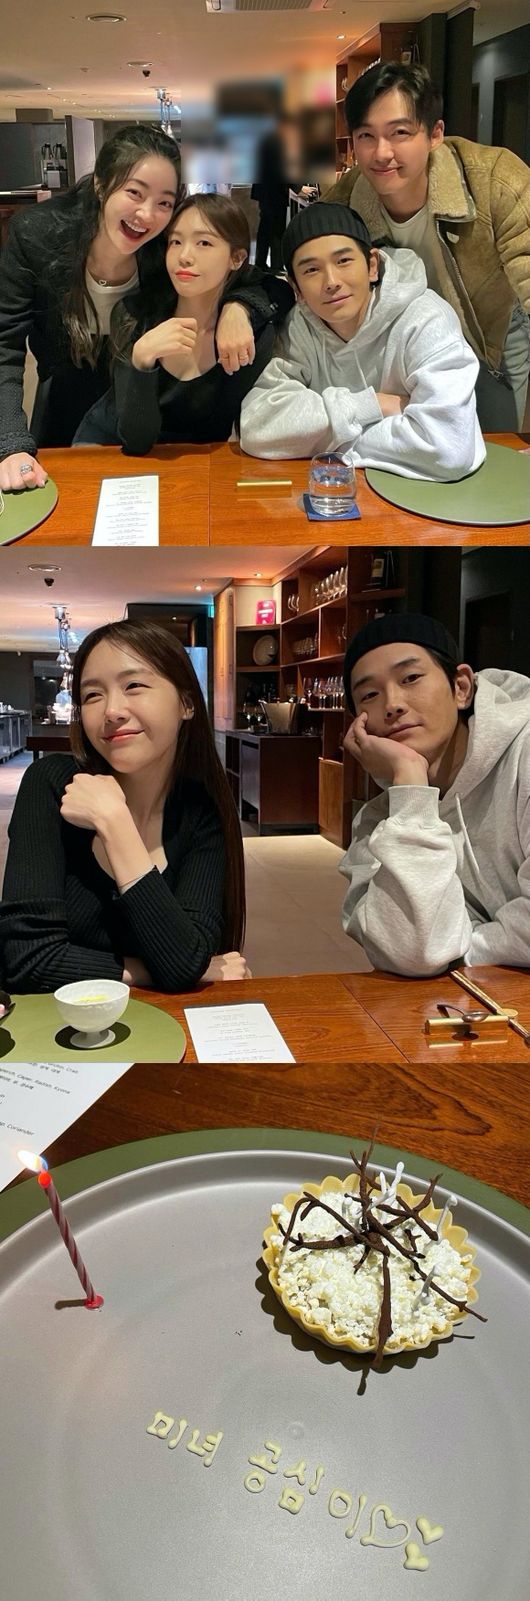 Actor Seo Hyo-rim has certified a welcome encounter.Seo Hyo-rim said on his personal instagram on the 10th, I like the comfort of Feelings, which I have seen a few days ago even if the beauty public opinion I met for a long time is a long time.My older brother Mins Surprise dessert was completely impressive, and I posted a picture with the article Felings  Our Happy Time when the public mind sometimes returned for a while.In the released photo, Seo Hyo-rim is a figure with actor Namgoong Min, Bang Min-ah and Onju-wan, who had a breathtaking relationship with the drama Beauty Publicity, which aired in 2016.Even though it has been nearly six years, the appearance of a good-looking woman who still boasts an unchanging visual is admirable.Especially, Seo Hyo-rim is impressed by the Surprise dessert prepared by Namgoong Min, and has not been able to hide his happy expression in the long-term child-rearing escape.Meanwhile, Seo Hyo-rim married Jeong Myung-ho, the son of actor Kim Soo-mi and representative of the trumpet F & B in 2019, and has a daughter.Seo Hyo-rim SNS